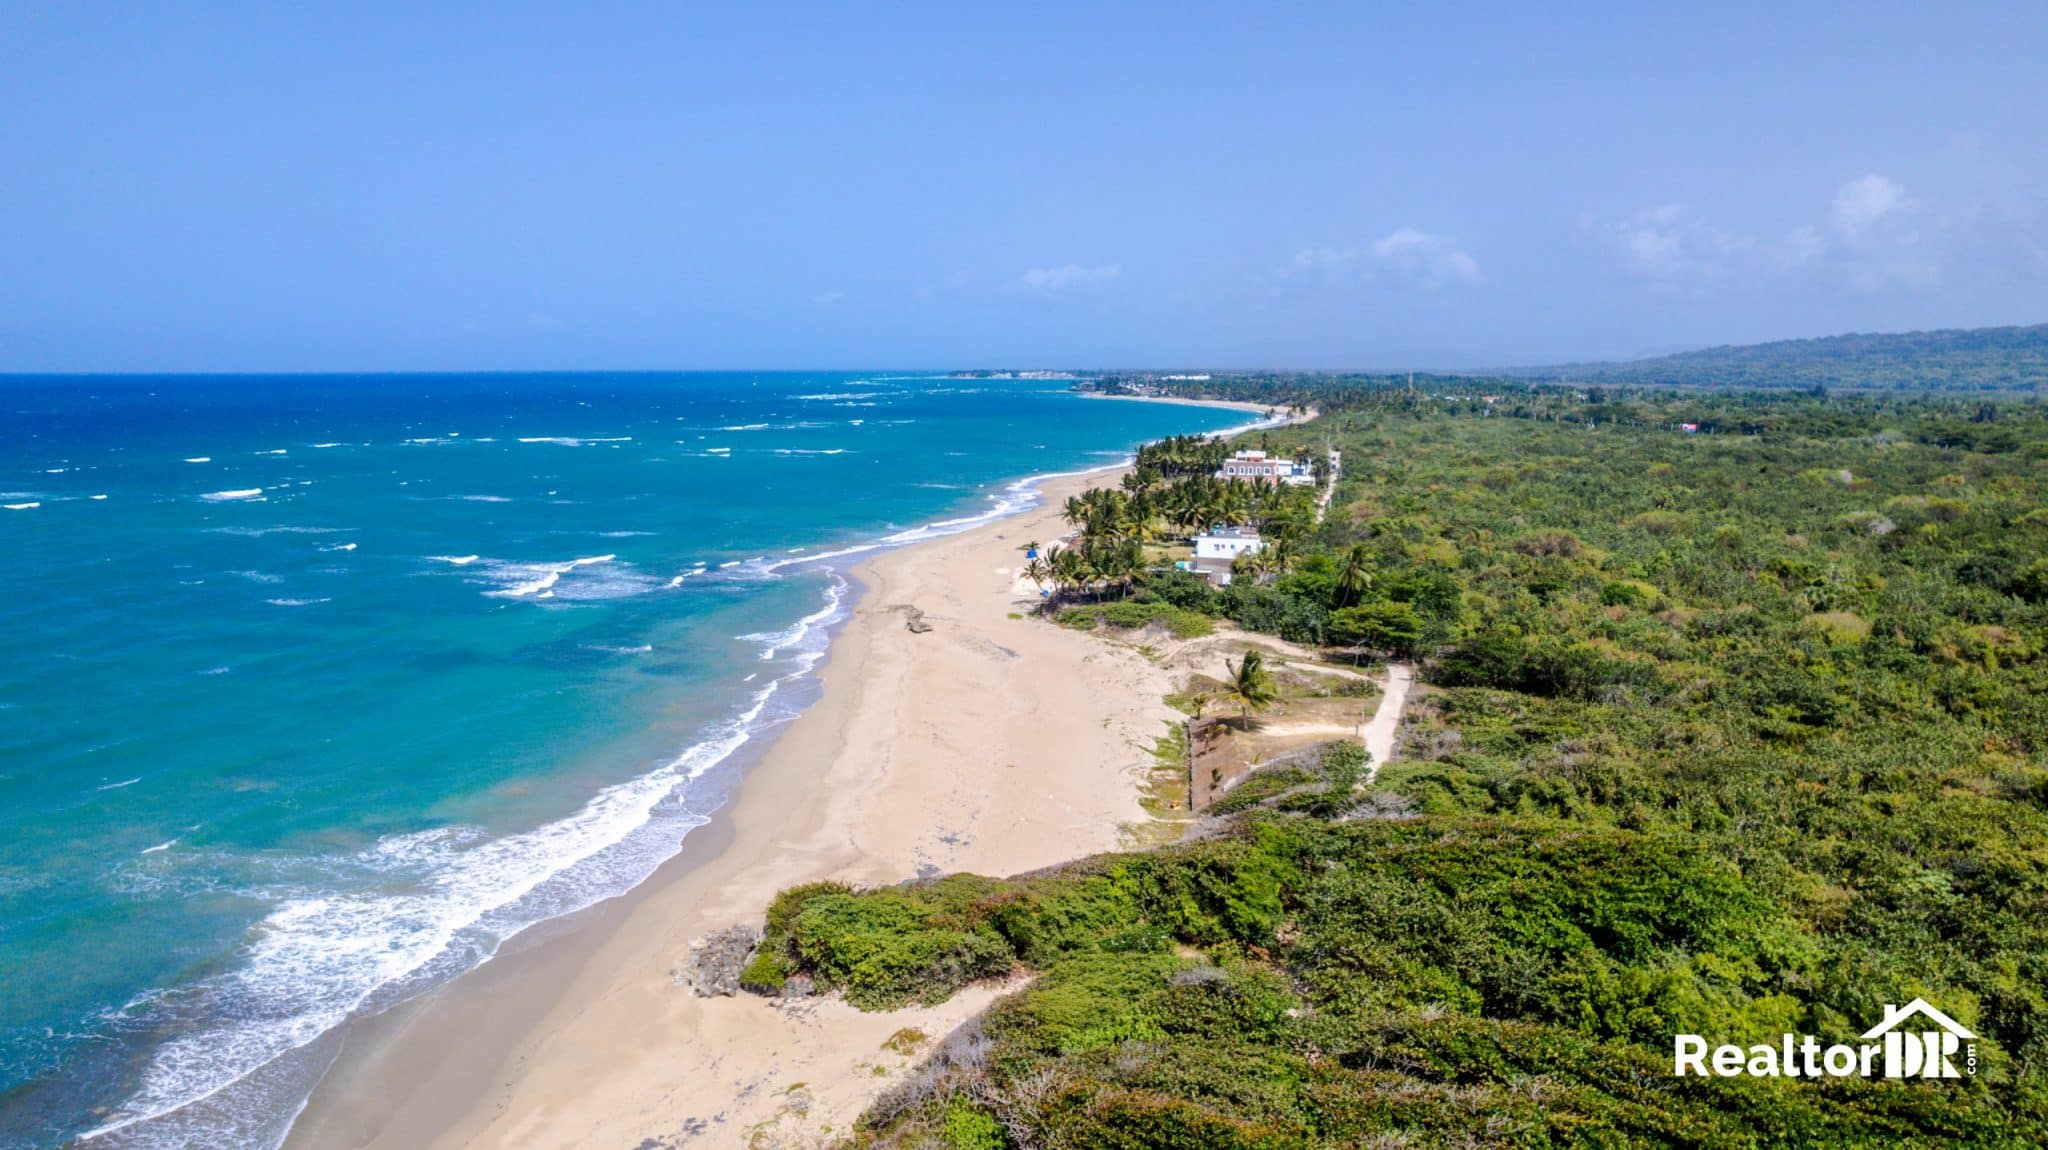 Exclusive Ocean Front Land In The Surfing Community of Encuentro!